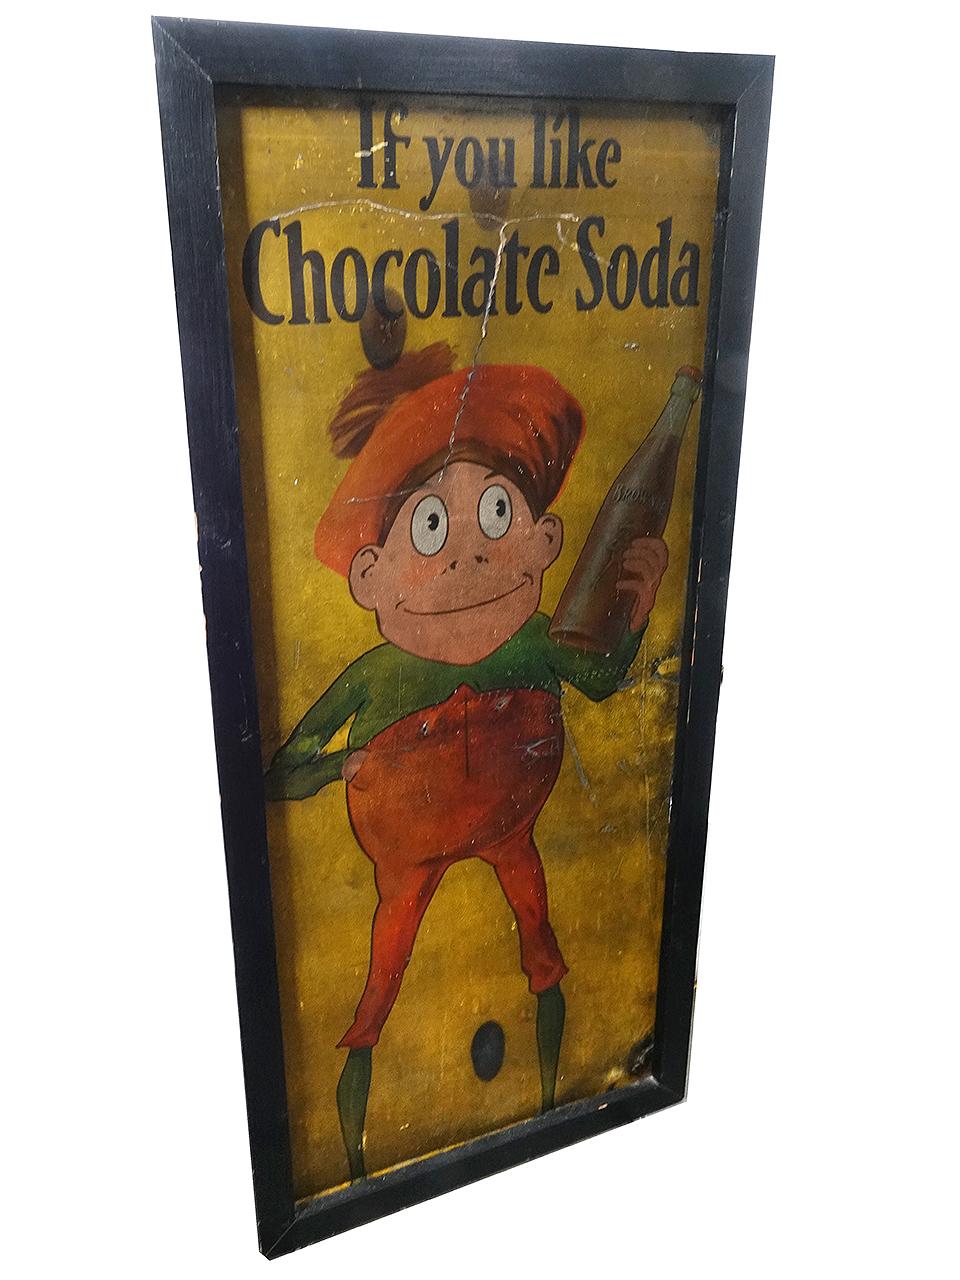 Brownie chocolate soda cardboard Sign. M.C.A. Sign Co. Massillon, O. Scuffs. You never know where or how things will turn up. This and a number of other advertising signs were found in the roof of an old farm house. They were repairing and replacing